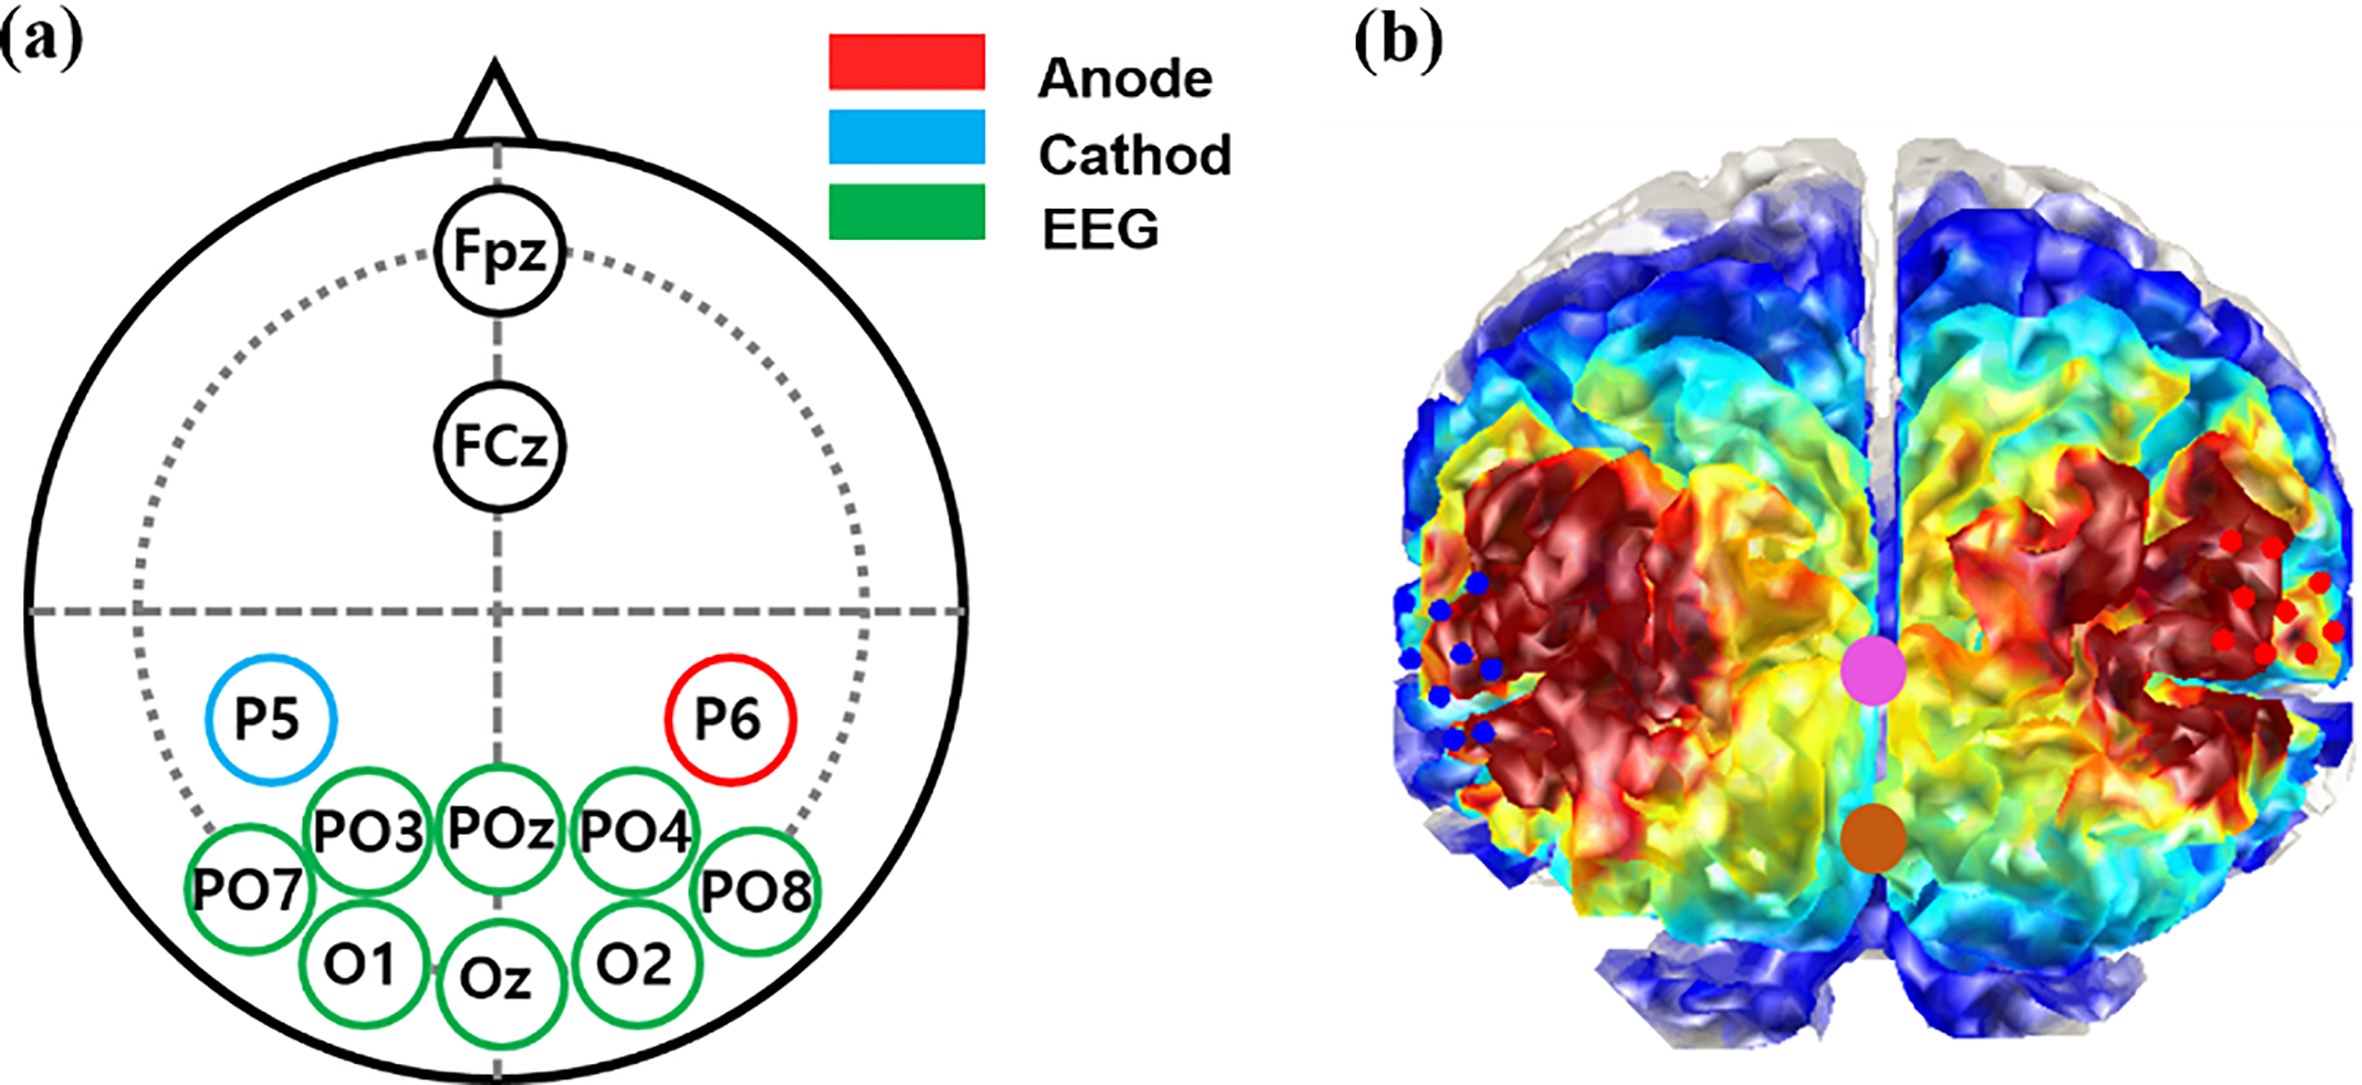 (a) Locations of EEG (green), tDCS anode (red) and cathode (blue) electrodes. (b) Simulated electrical filed map generated by tDCS. The pink and brown circles represent POz and Oz used for data analysis.